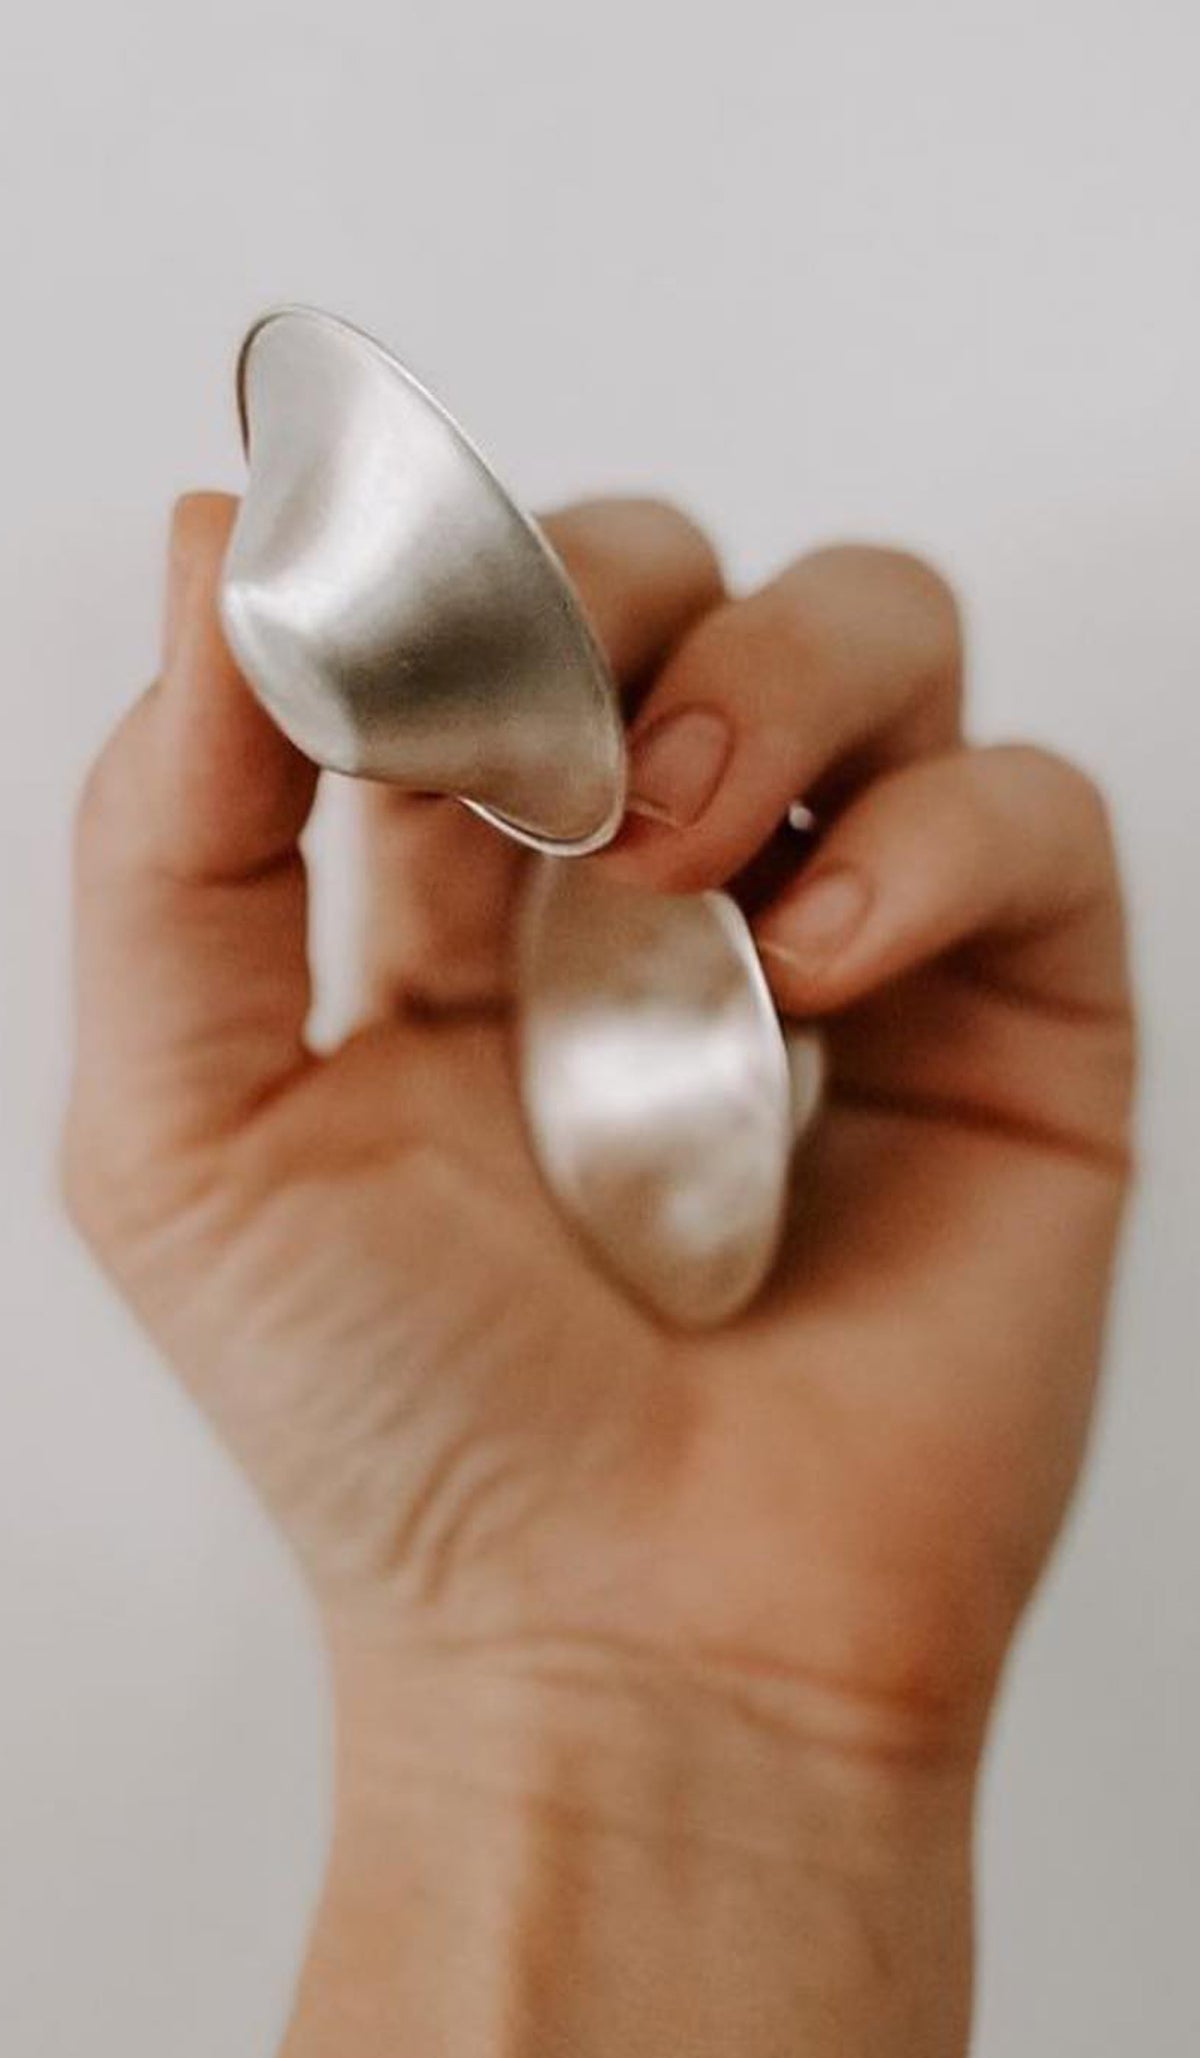 Silverette Nursing Cups - Protect and heal breastfeeding nipples